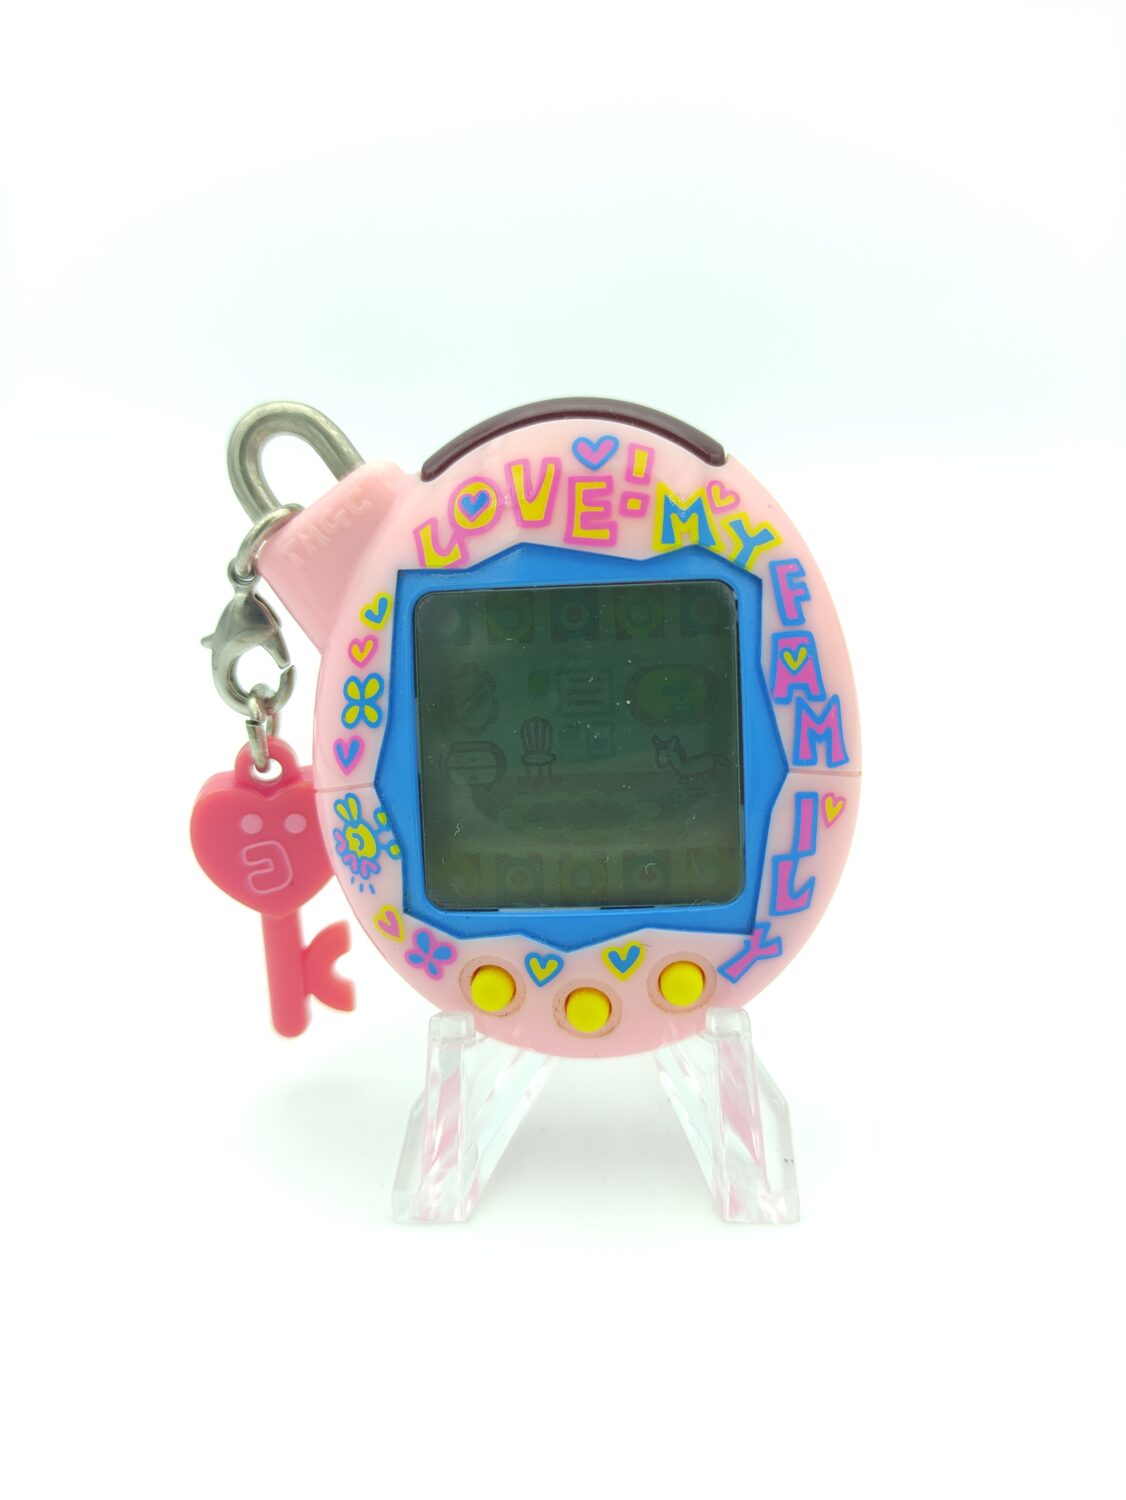 Bandai Tamagotchi Connection V5 We Are Familitchi Love My Family for sale online 